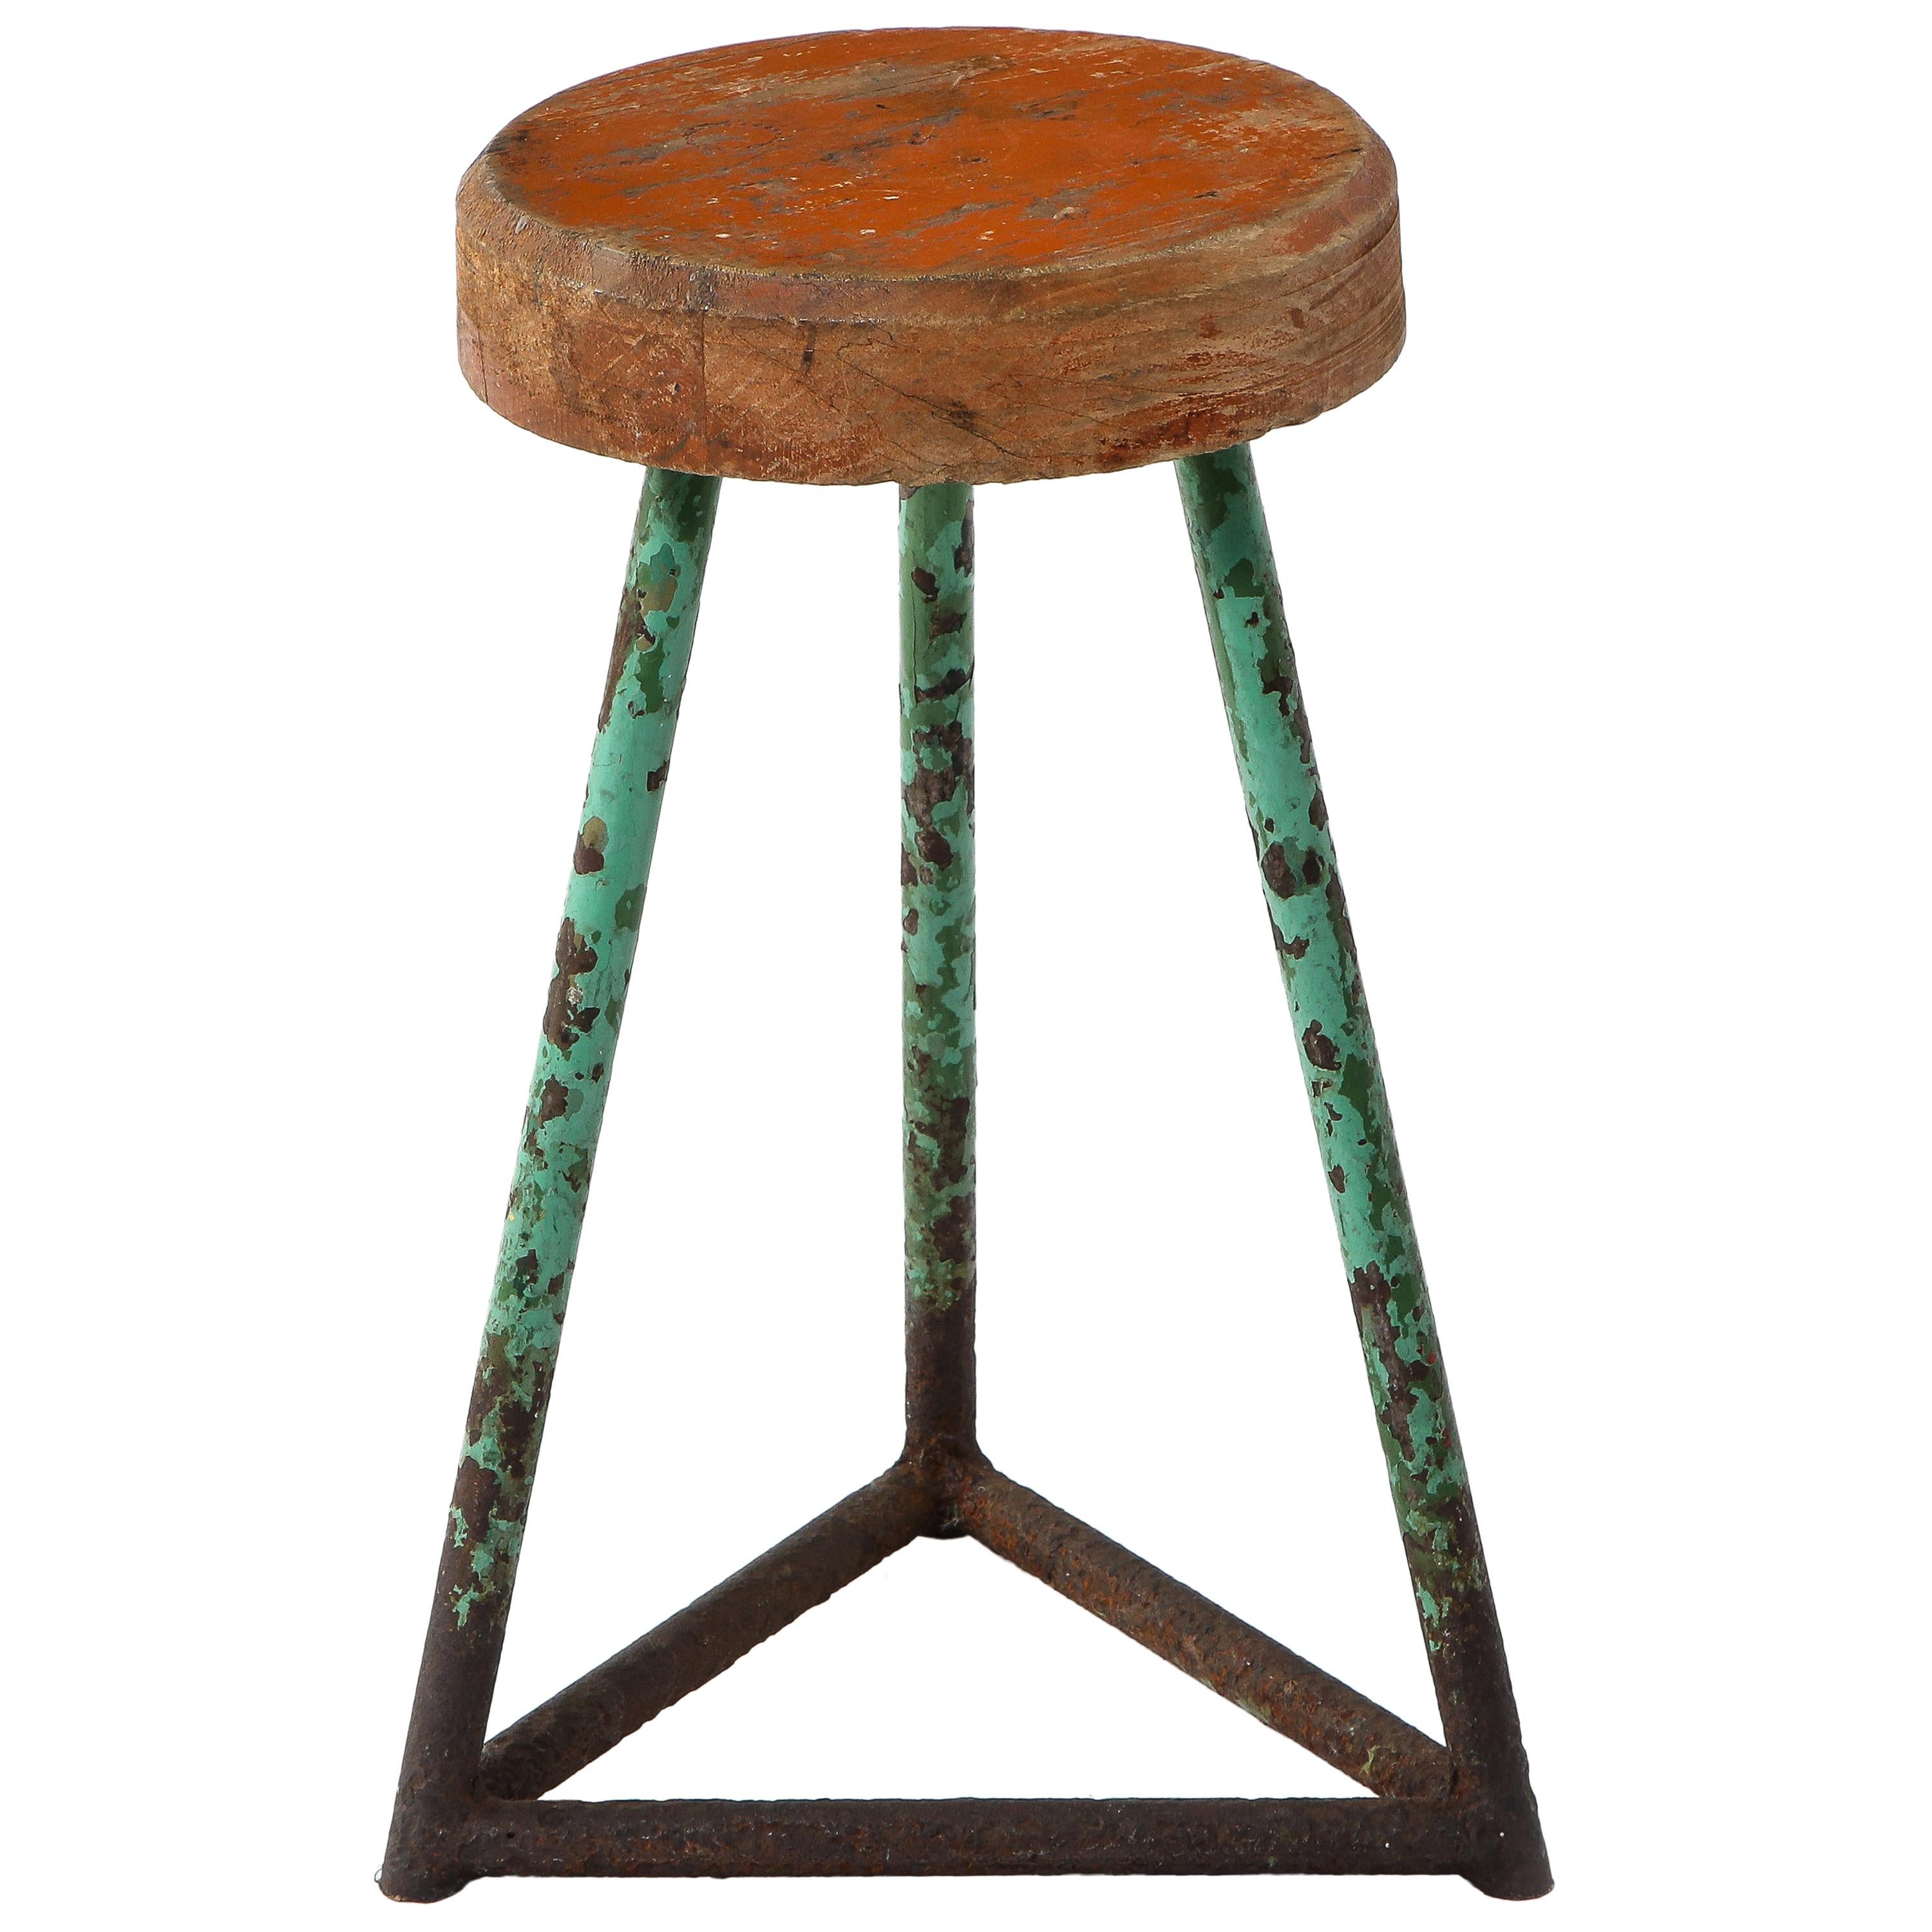 Vintage Industrial Wood and Metal Stool, Heavy Patina, Belgium 1960's For Sale